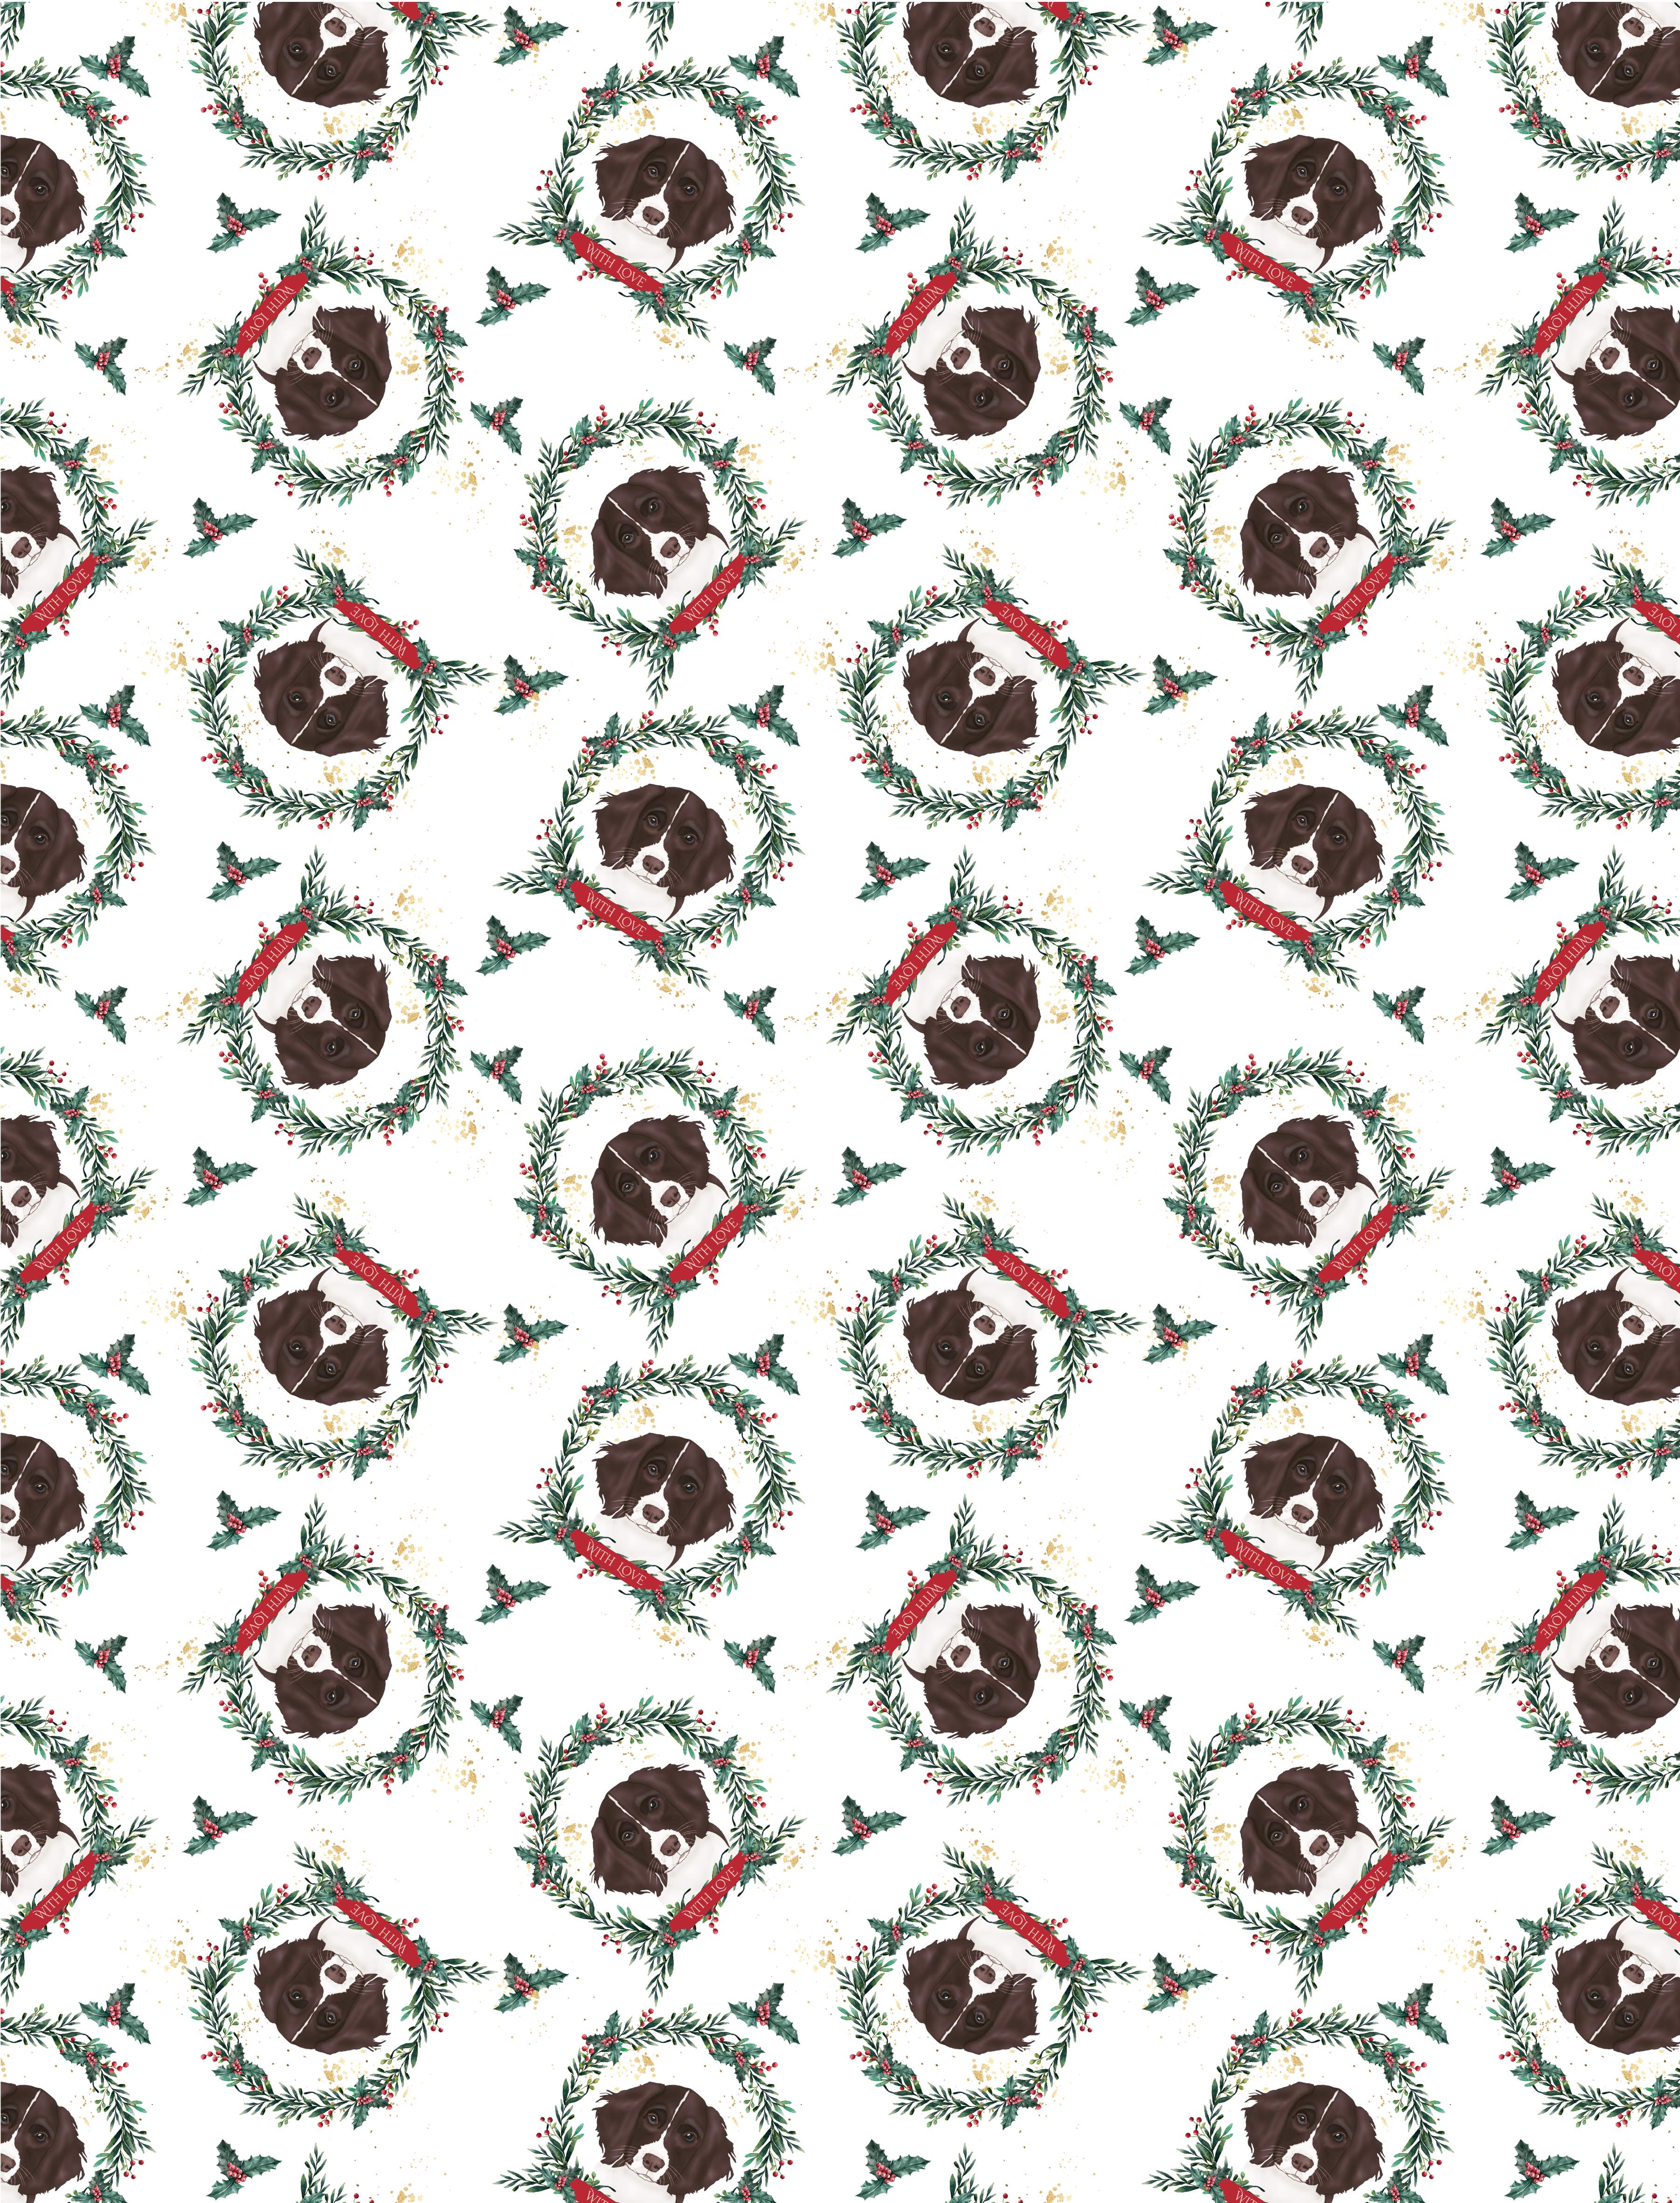 Luxury 100gsm Springer Spaniel Dog Wrapping Paper